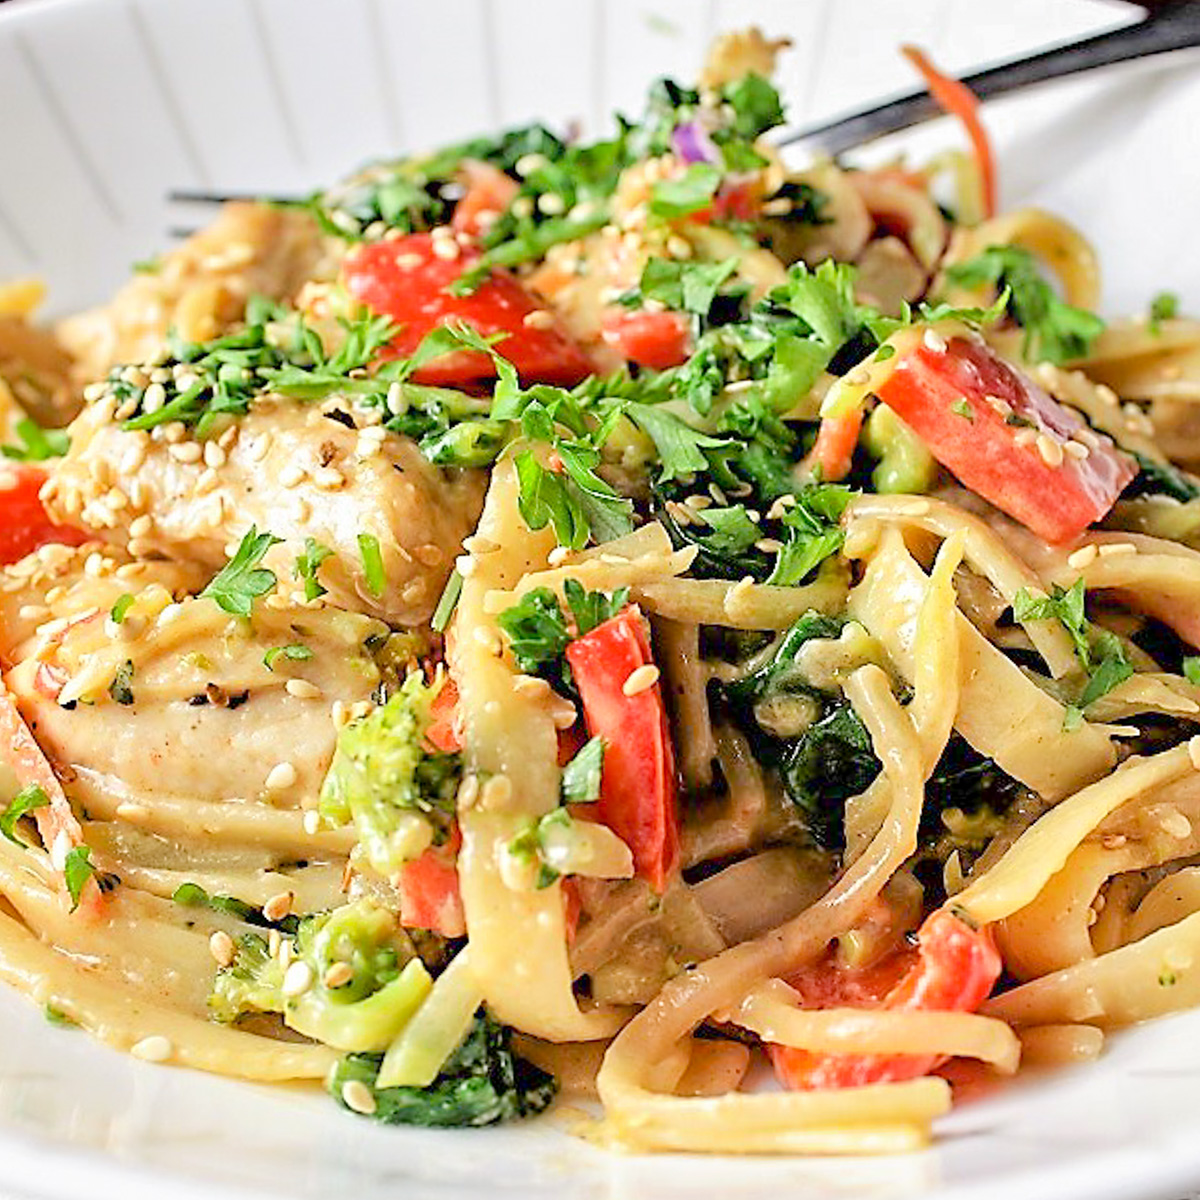 peanut chicken with veggies and noodles on a plate.